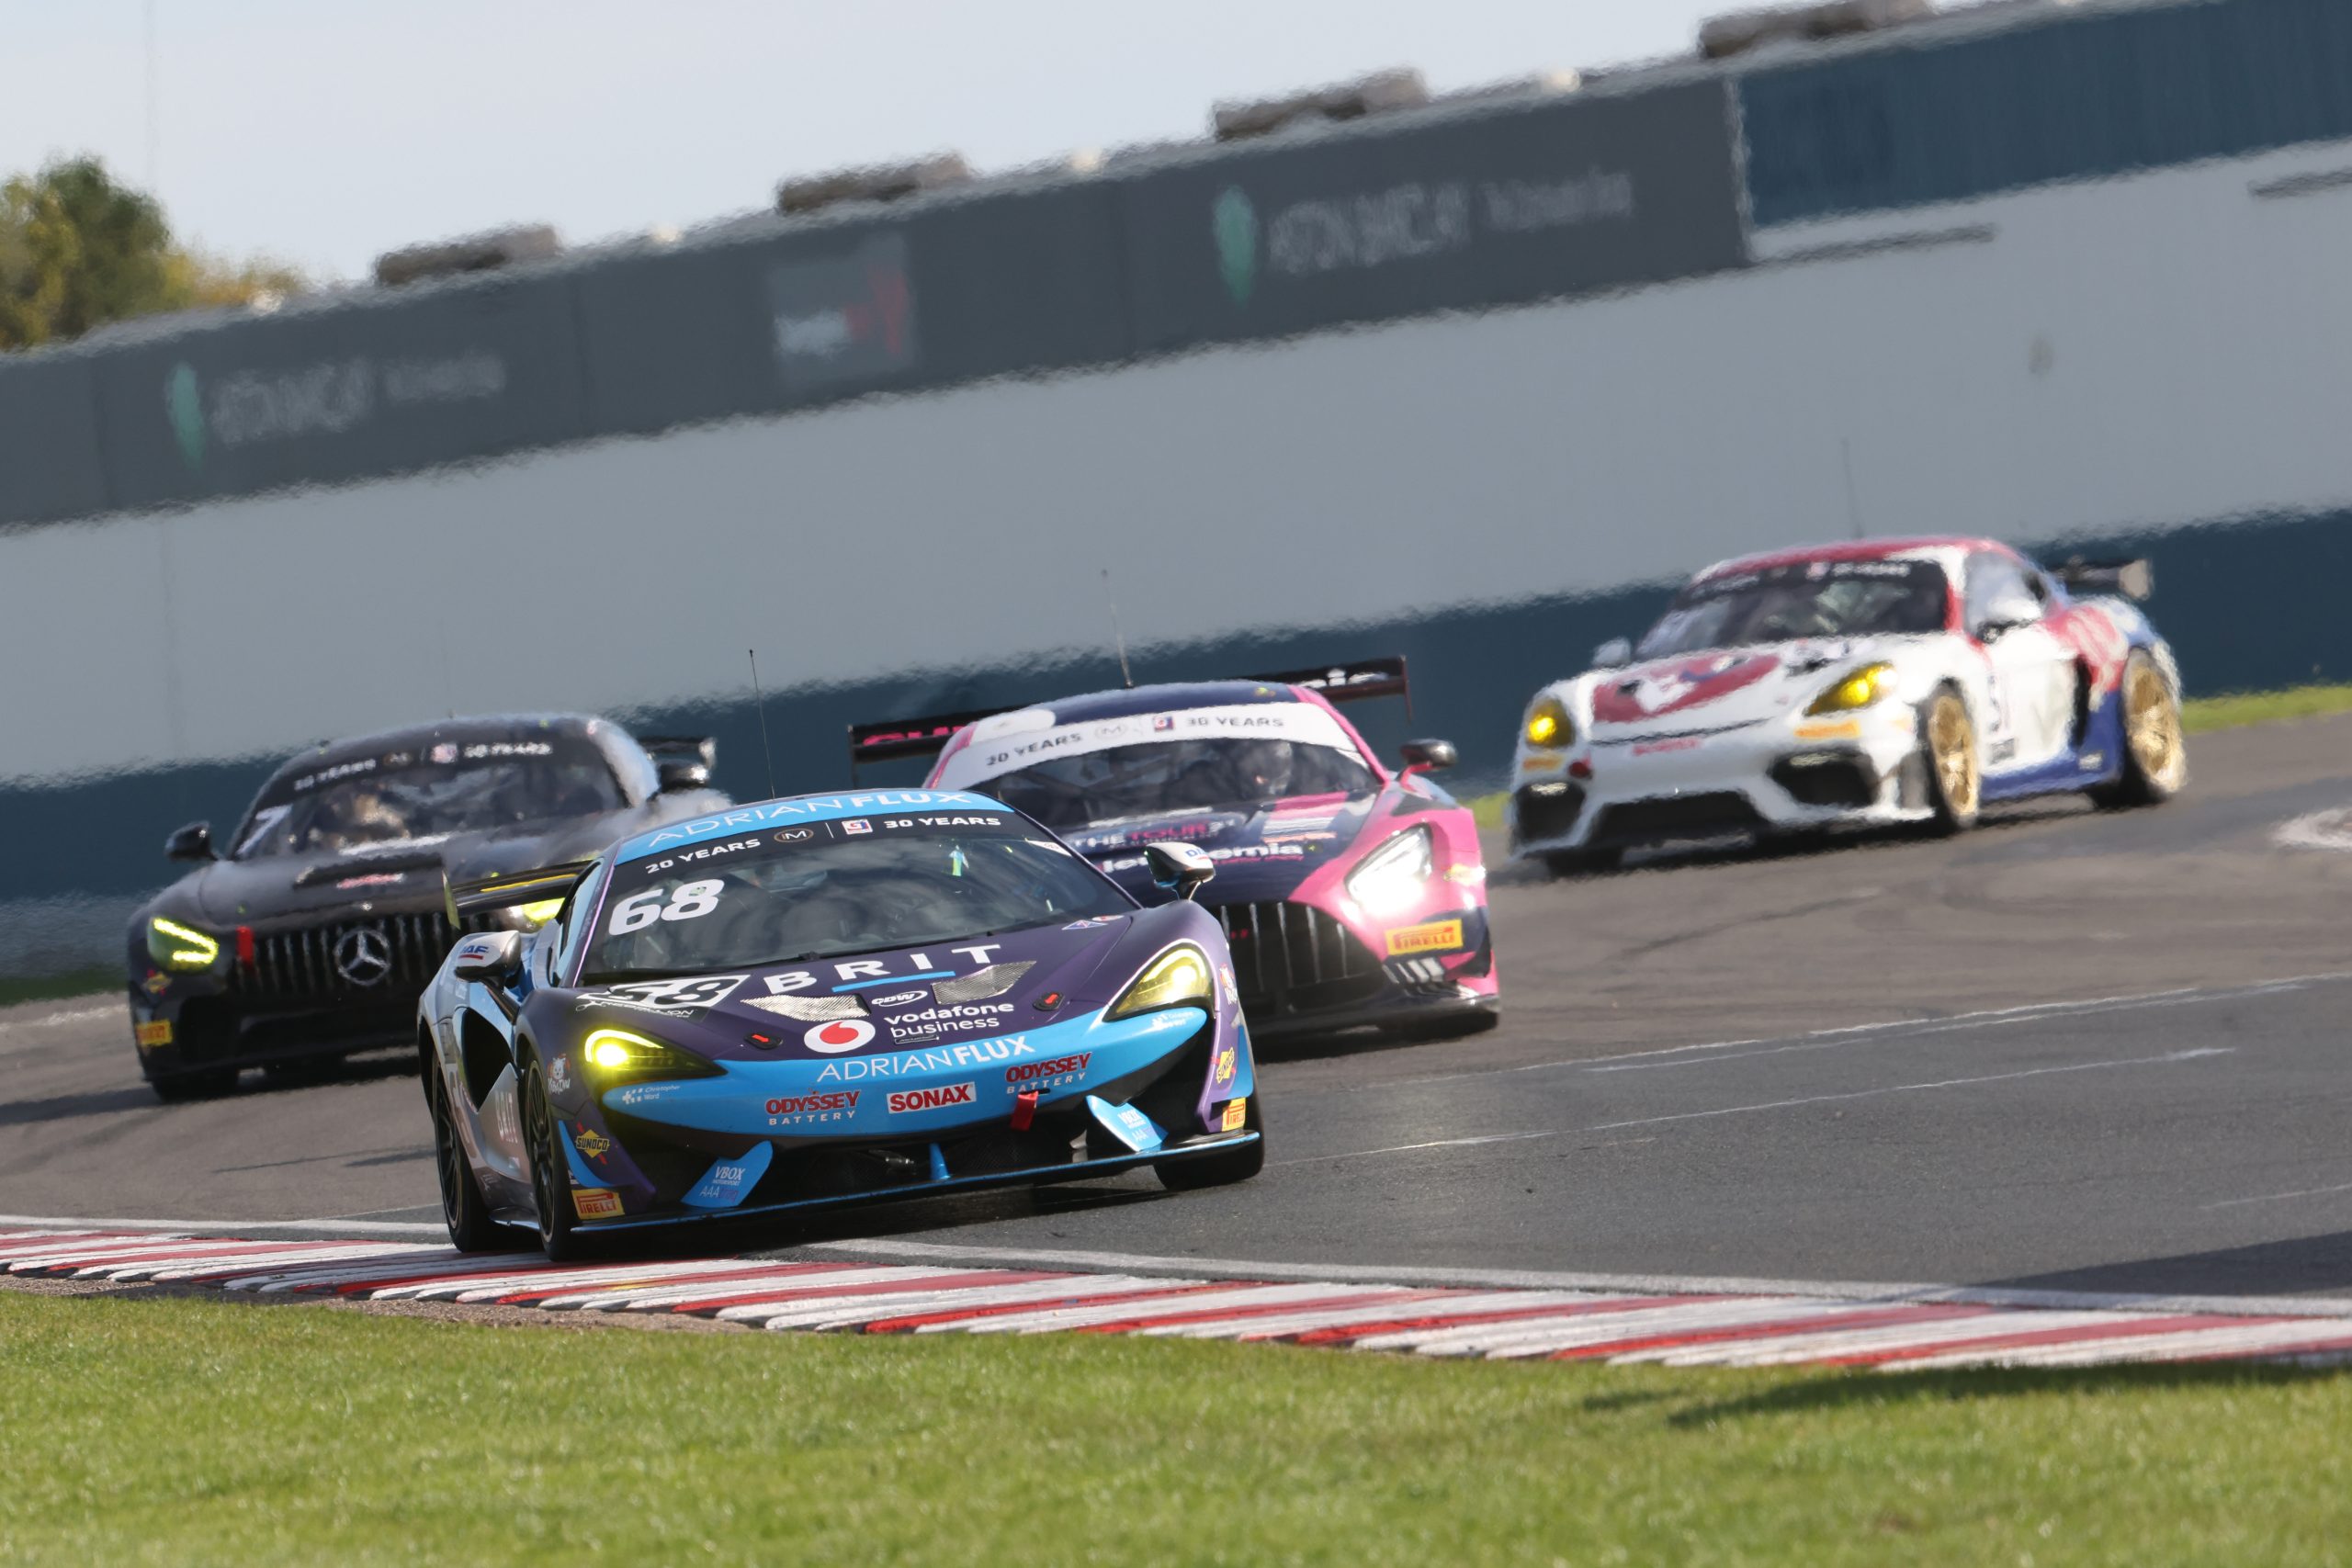 TEAM BRIT FINISH SECOND IN PRO-AM CHAMPIONSHIP IN FIRST YEAR OF BRITISH GT